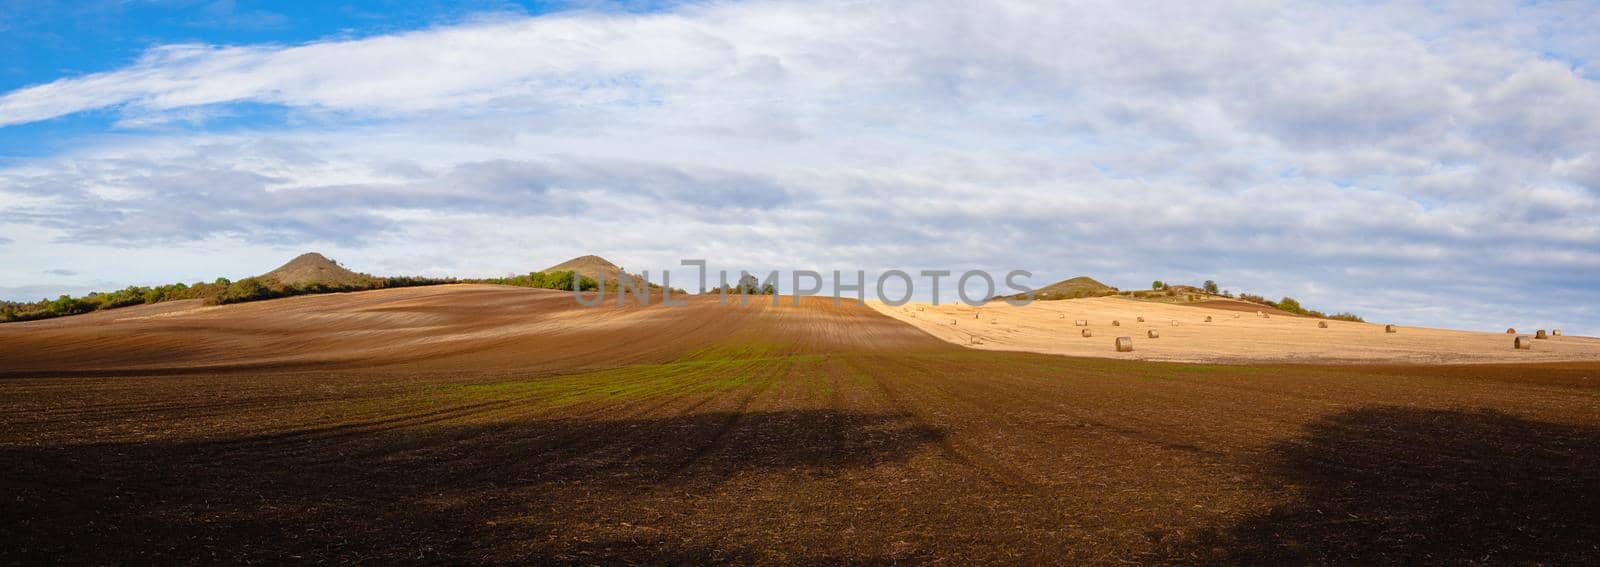 Straw bales on a stubble in Central Bohemian Uplands, Czech Republic. Field landscape bales of straw on a farm field. Panorama Image.